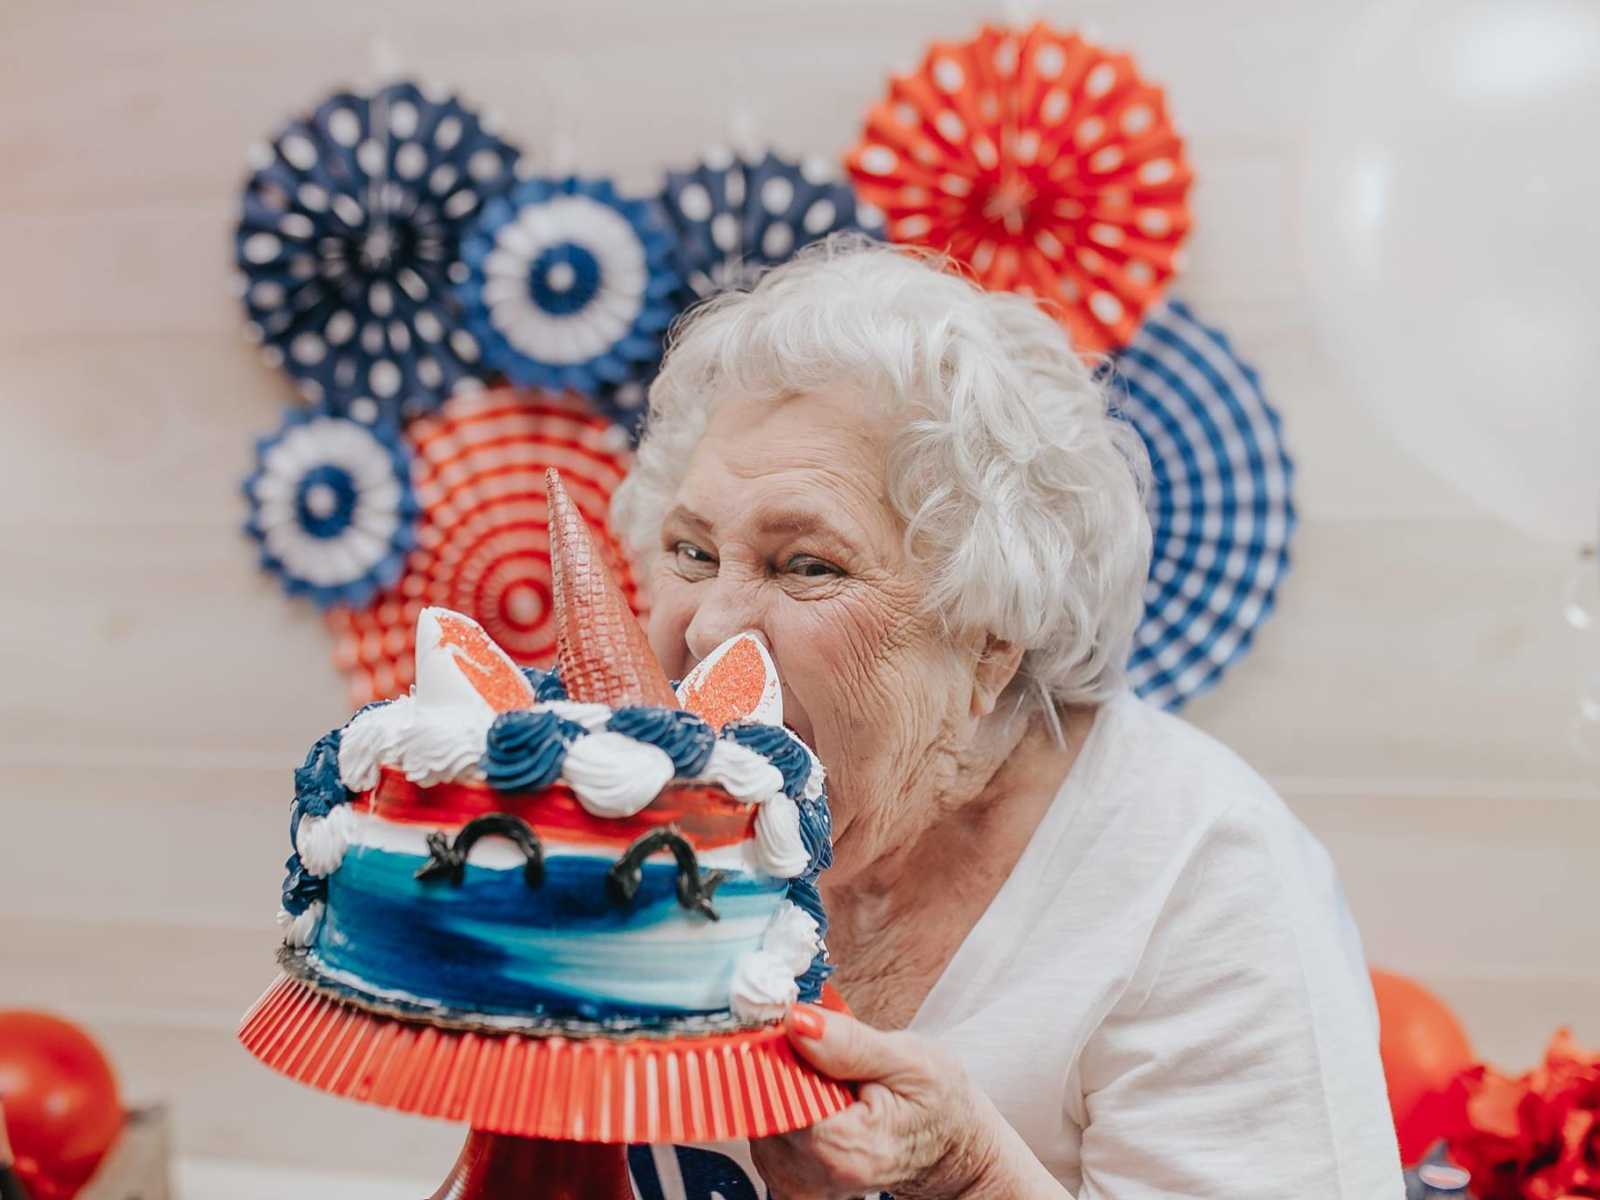 elderly woman taking bite out of red white and blue cake that resembles a unicorn